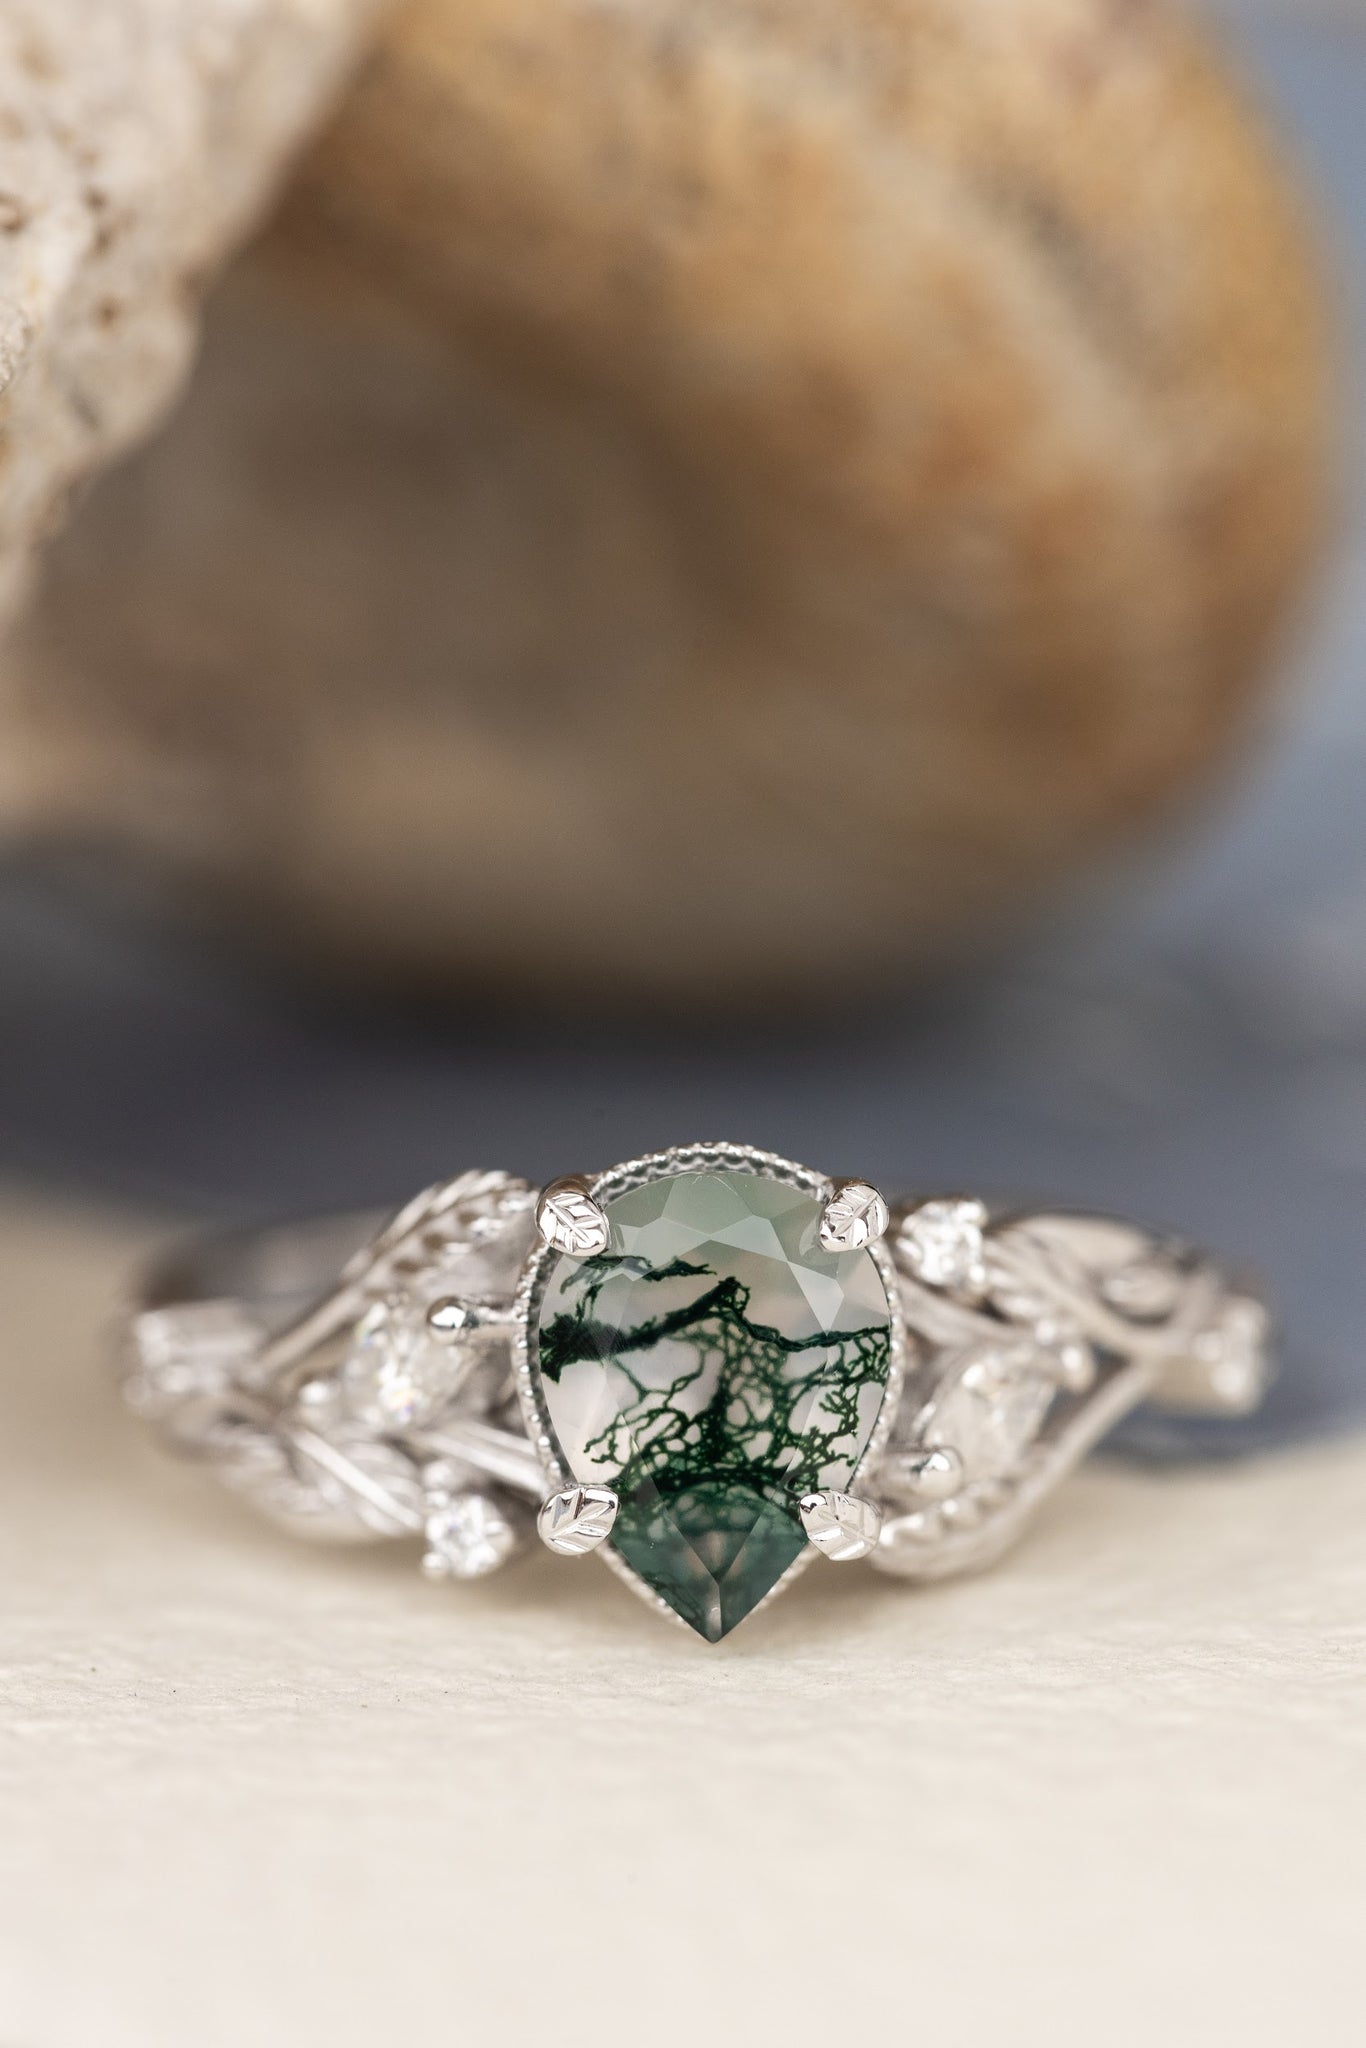 READY TO SHIP: Patricia ring in 14K or 18K white gold, natural moss agate pear cut 8x6 mm, accent moissanites, AVAILABLE RING SIZES: 6-8US - Eden Garden Jewelry™